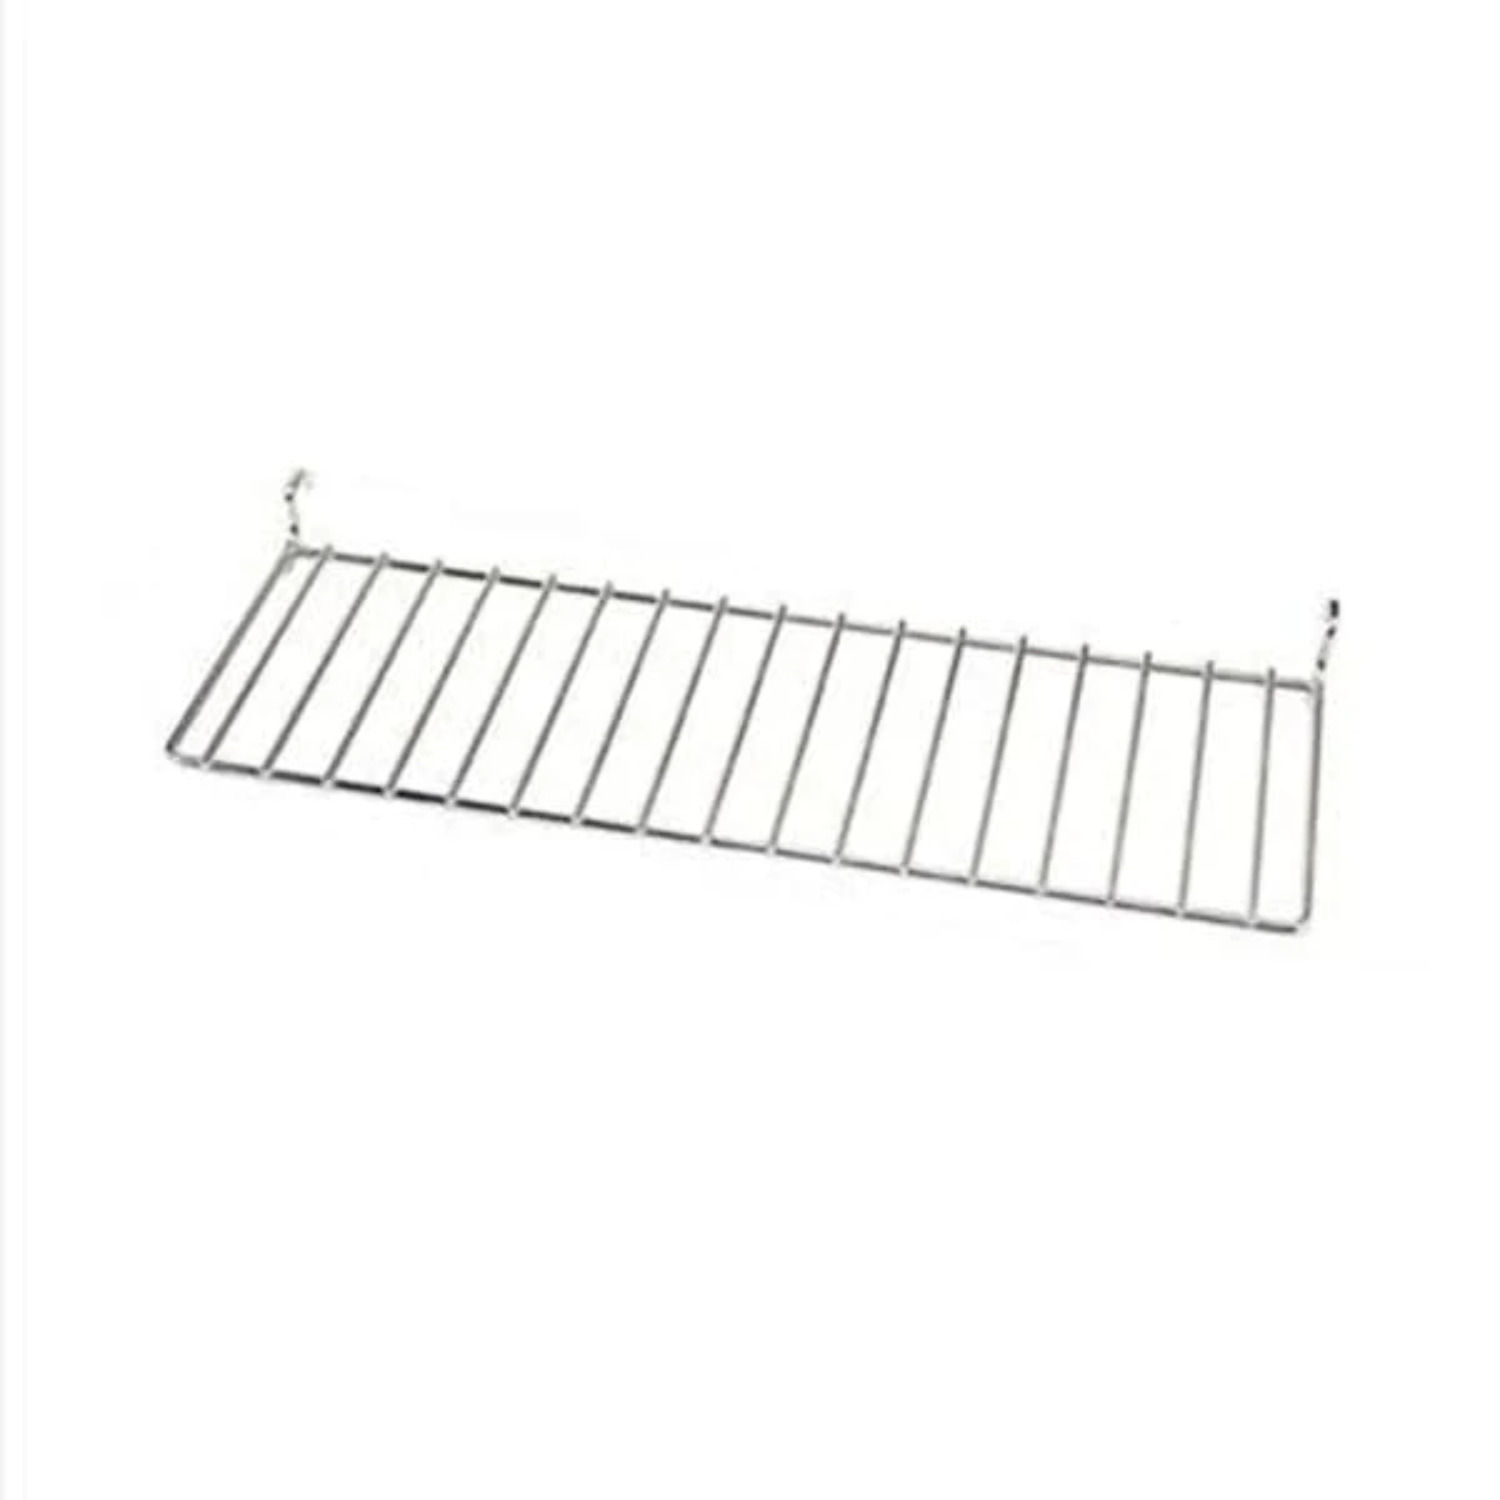 BBQ Grill DCS Grate Warming Rack BGB30 - Stainless Steel 212927 - image 1 of 1